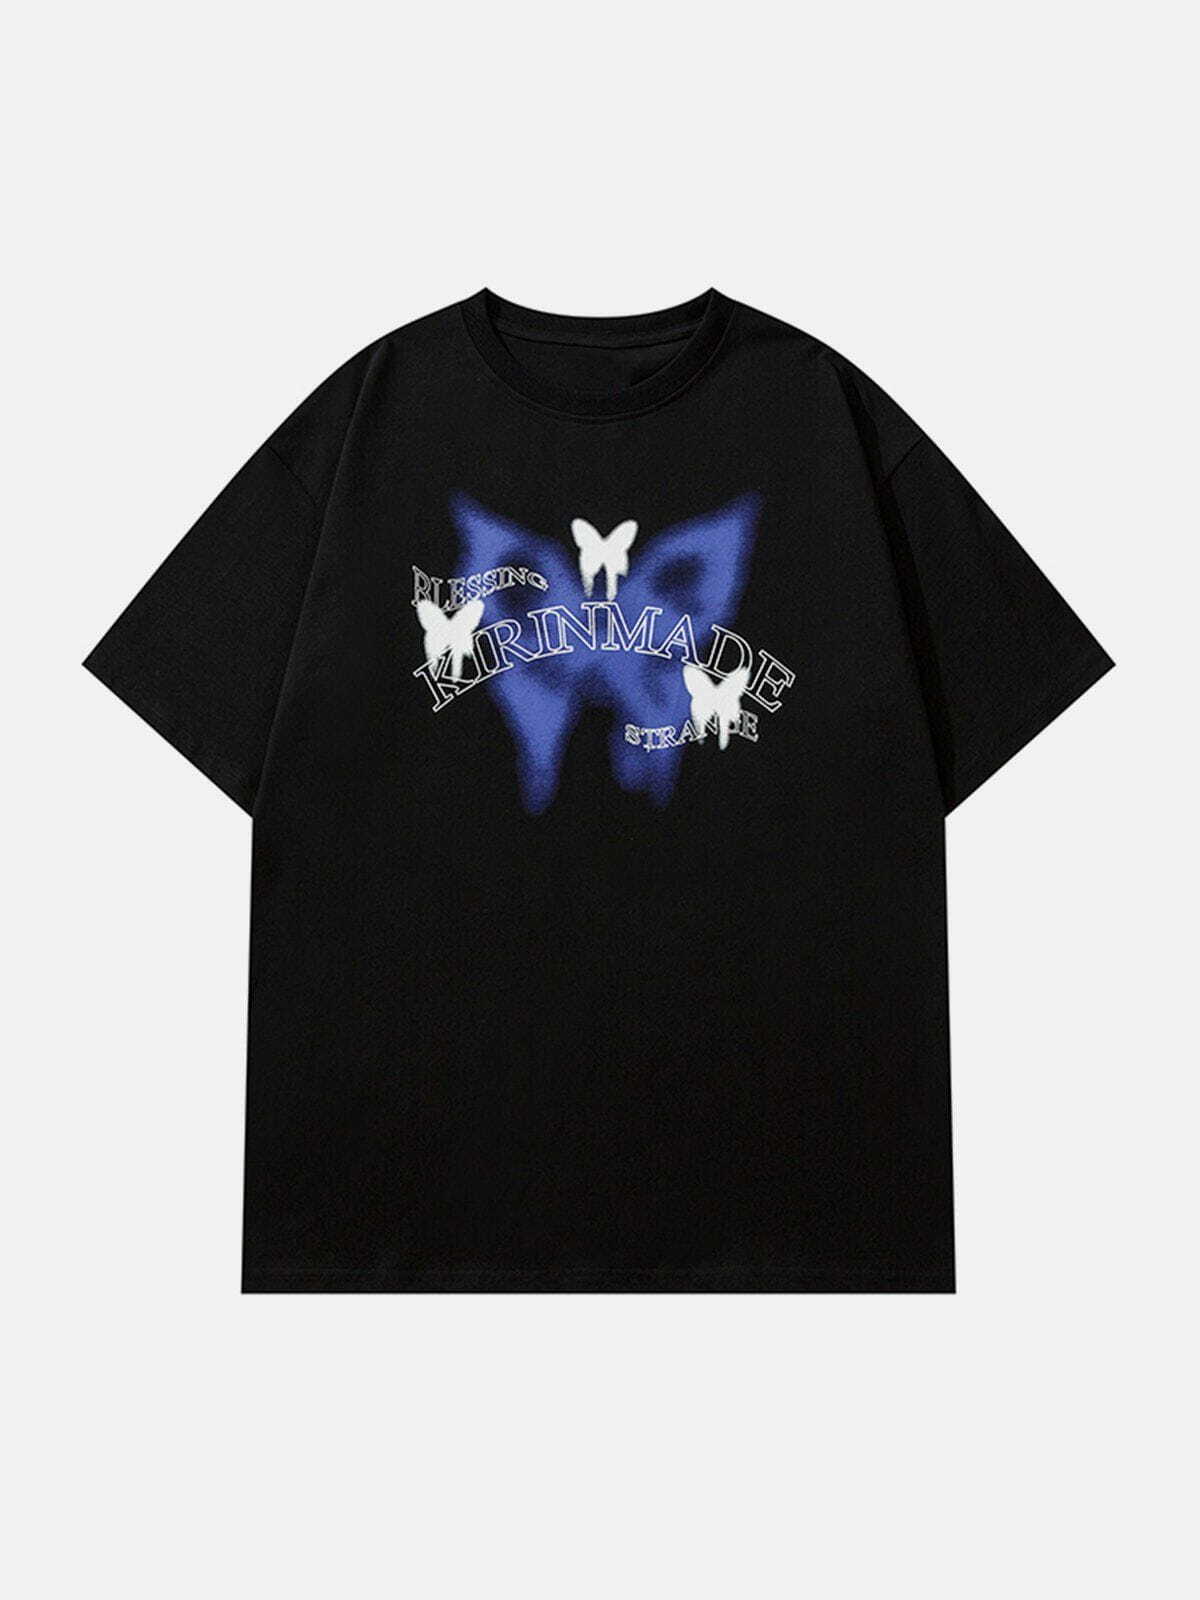 vibrant butterfly tee edgy and retro streetwear fashion 6725